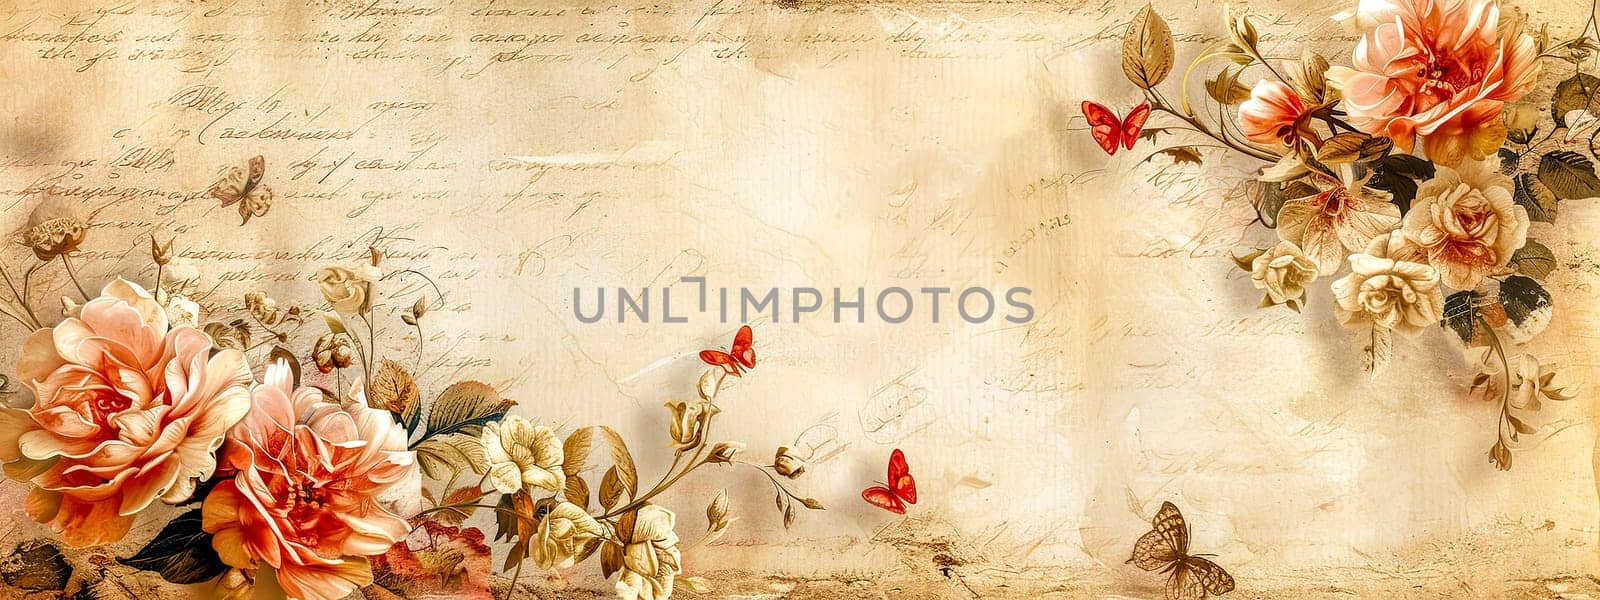 Elegant Vintage Floral and Butterfly Wallpaper - Antique Roses with Handwritten Script Background, copy space